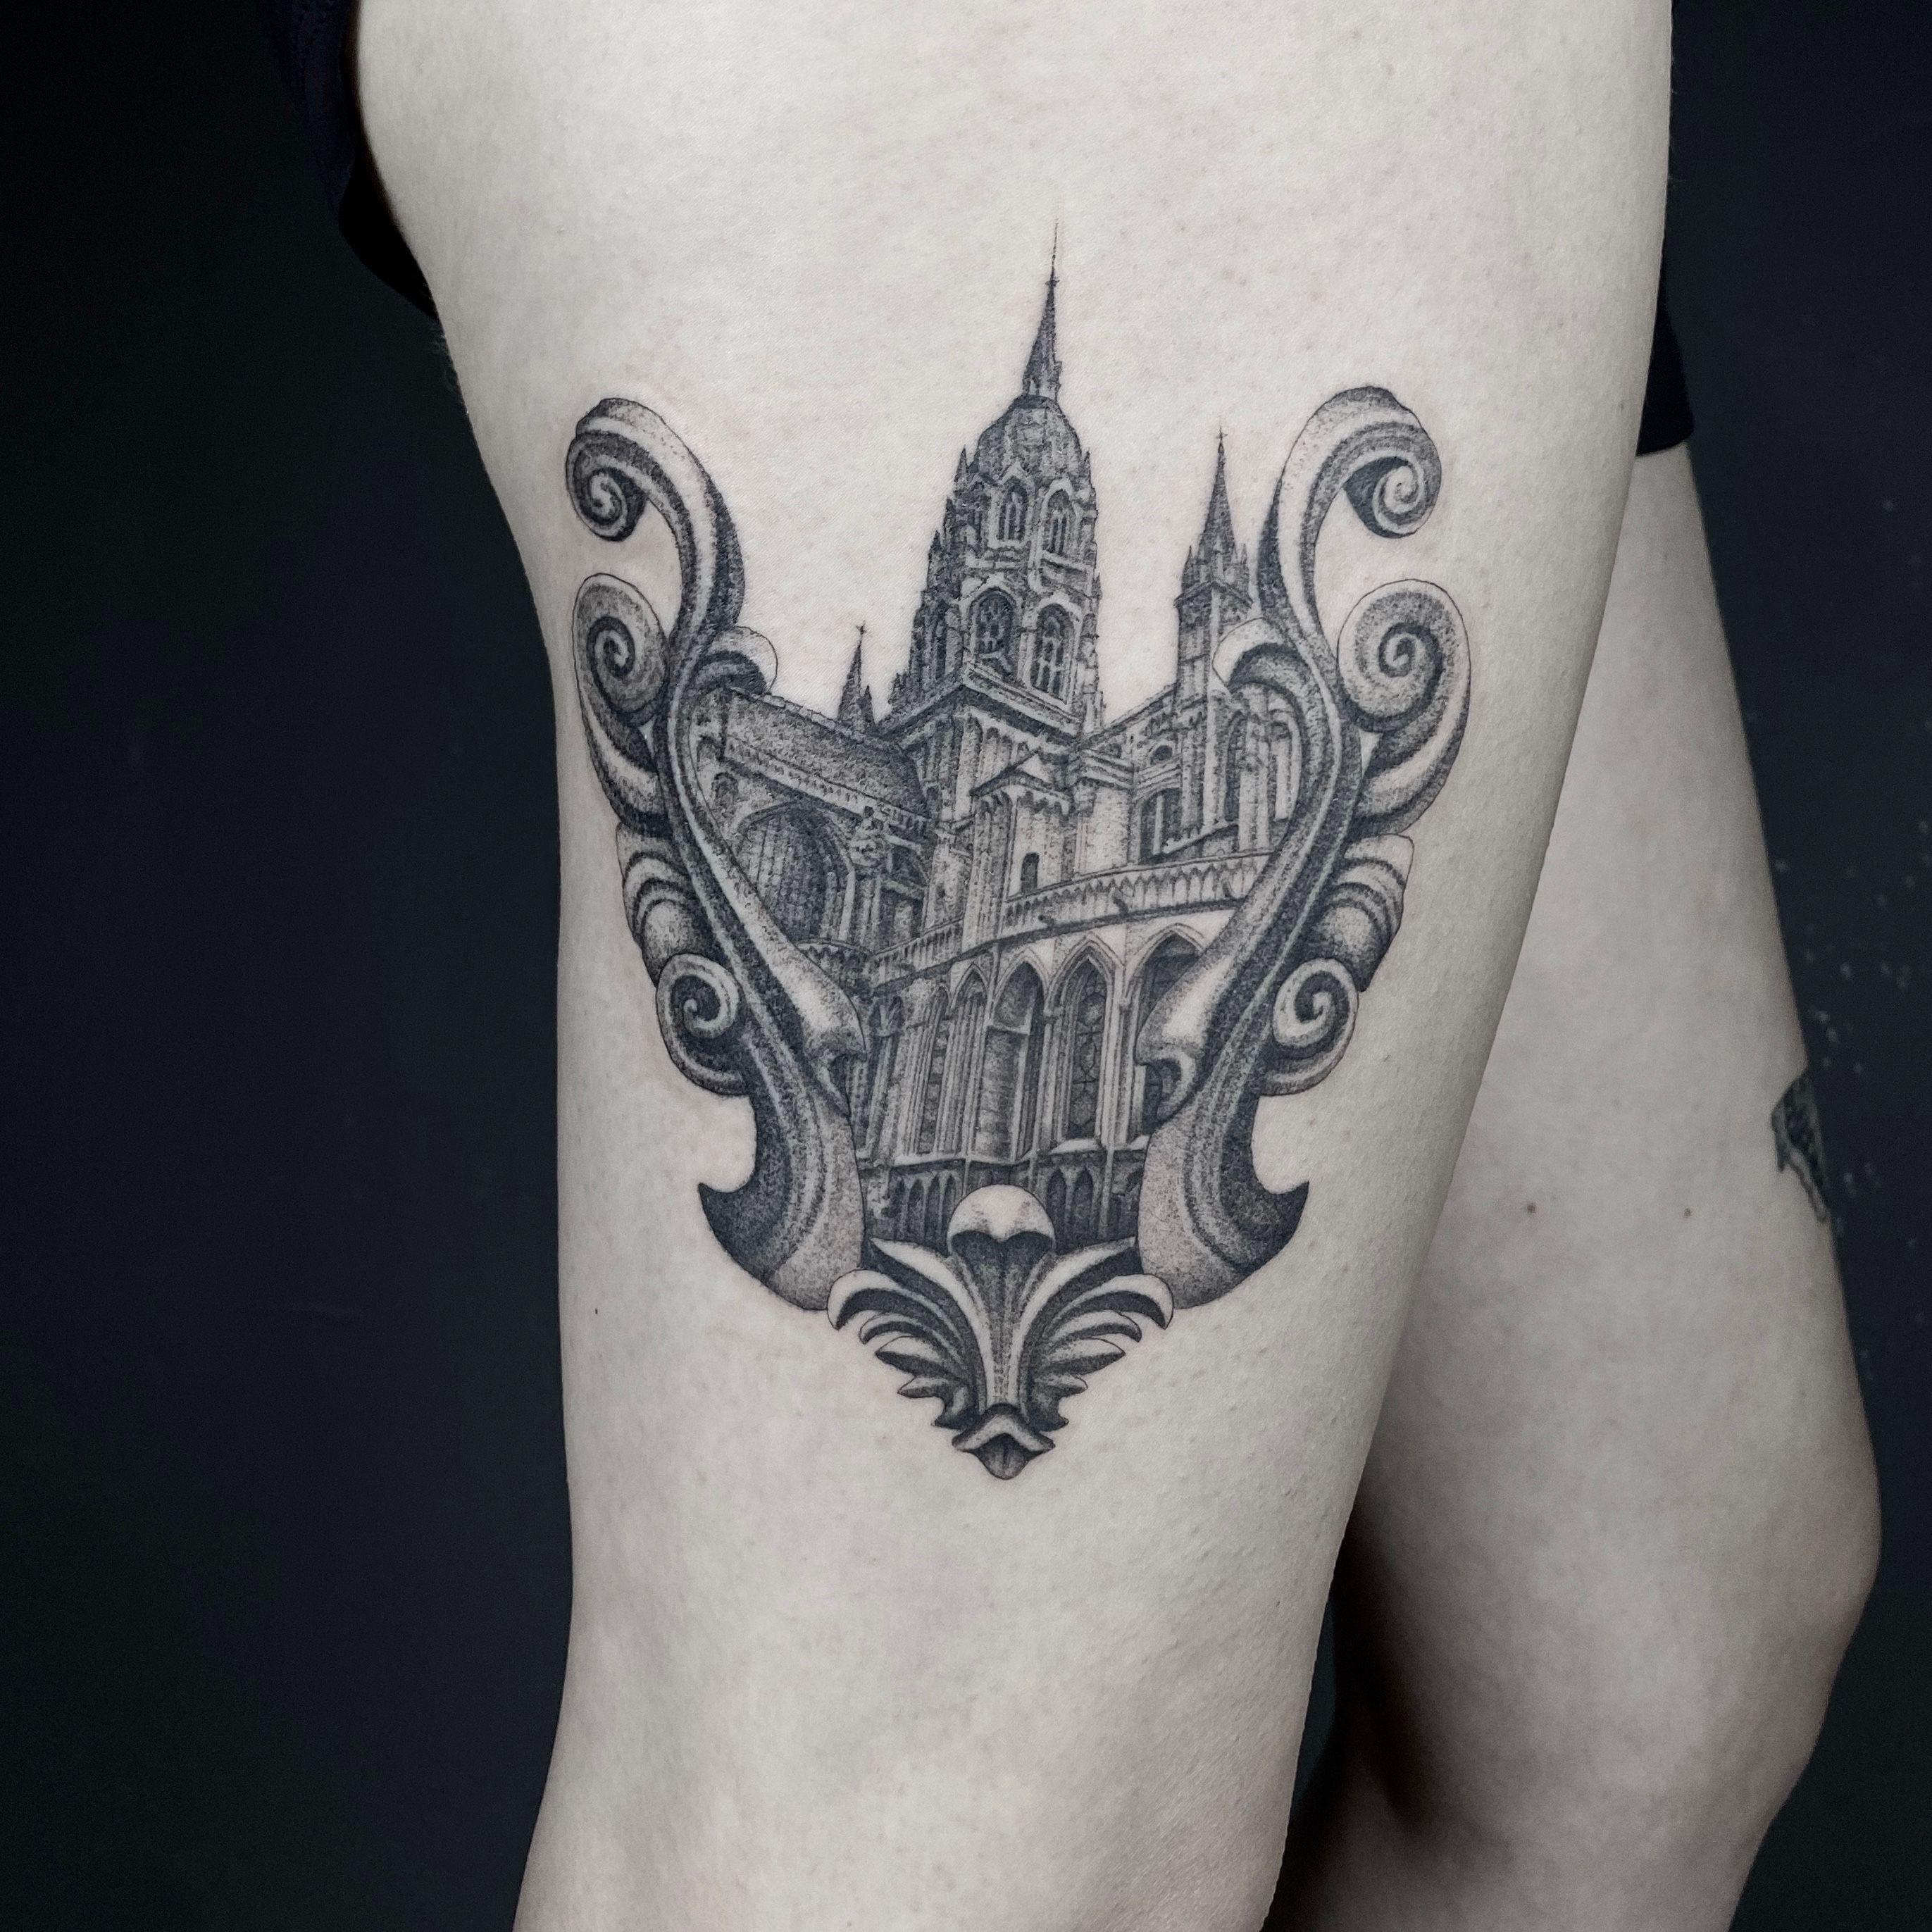 Tattoos for architects | Collater.al